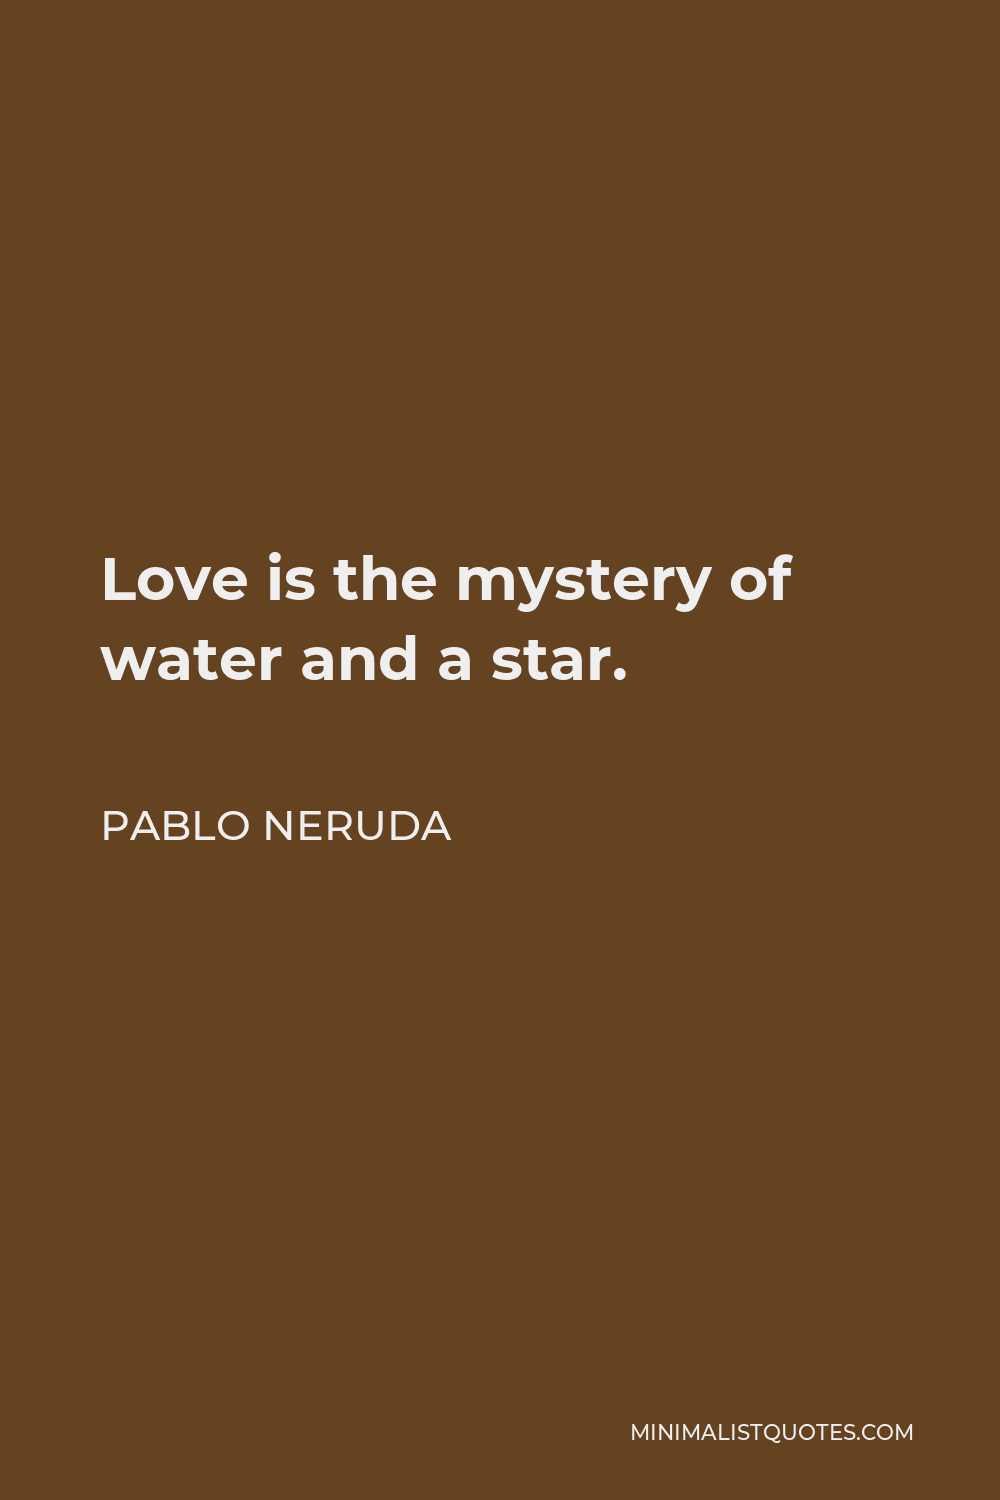 Pablo Neruda Quote - Love is the mystery of water and a star.